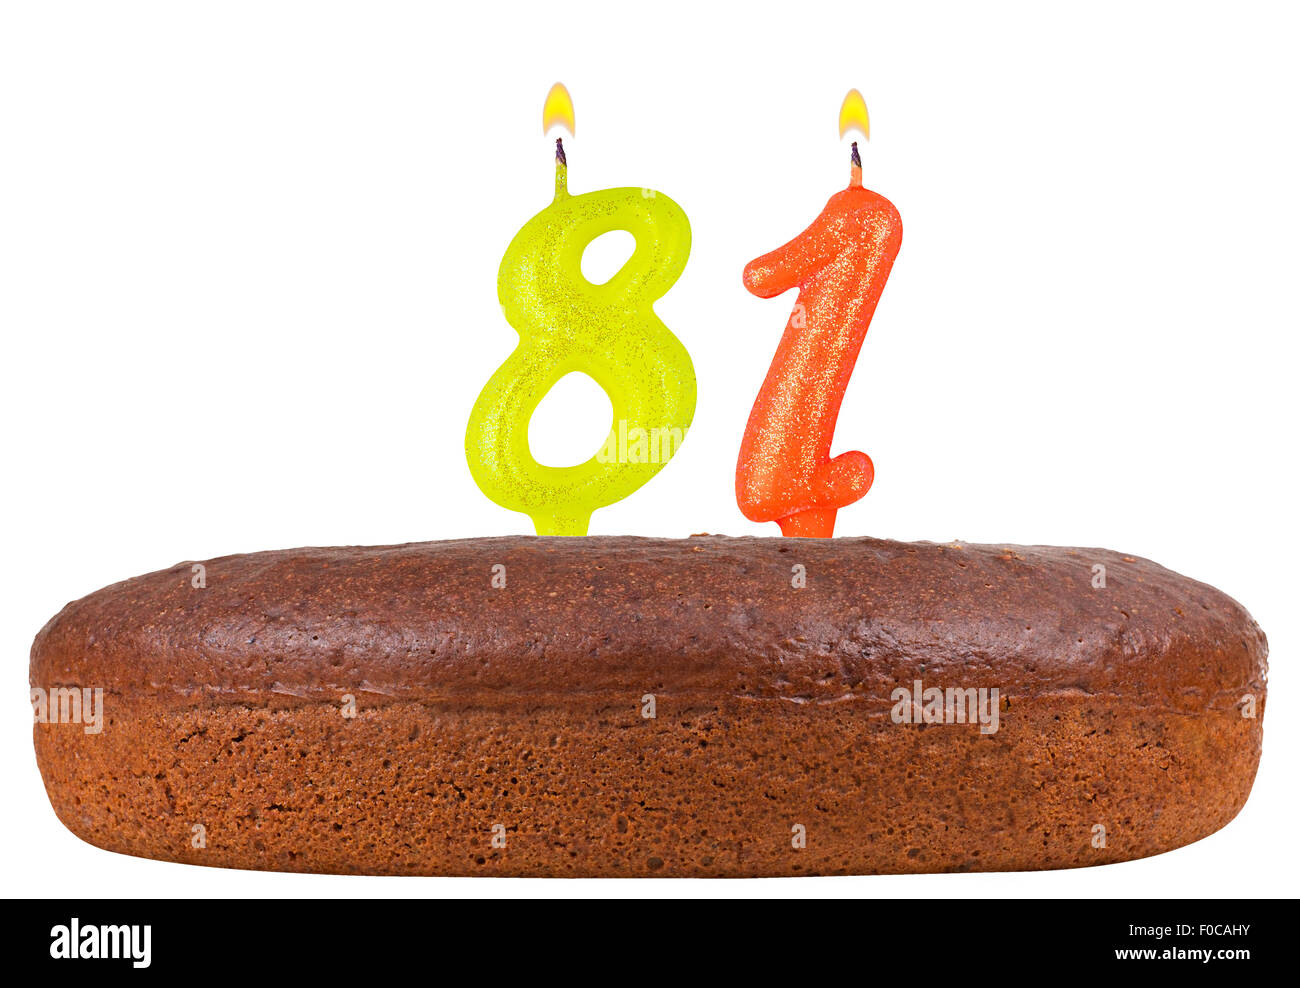 birthday cake with candles number 81 isolated on white background Stock Photo